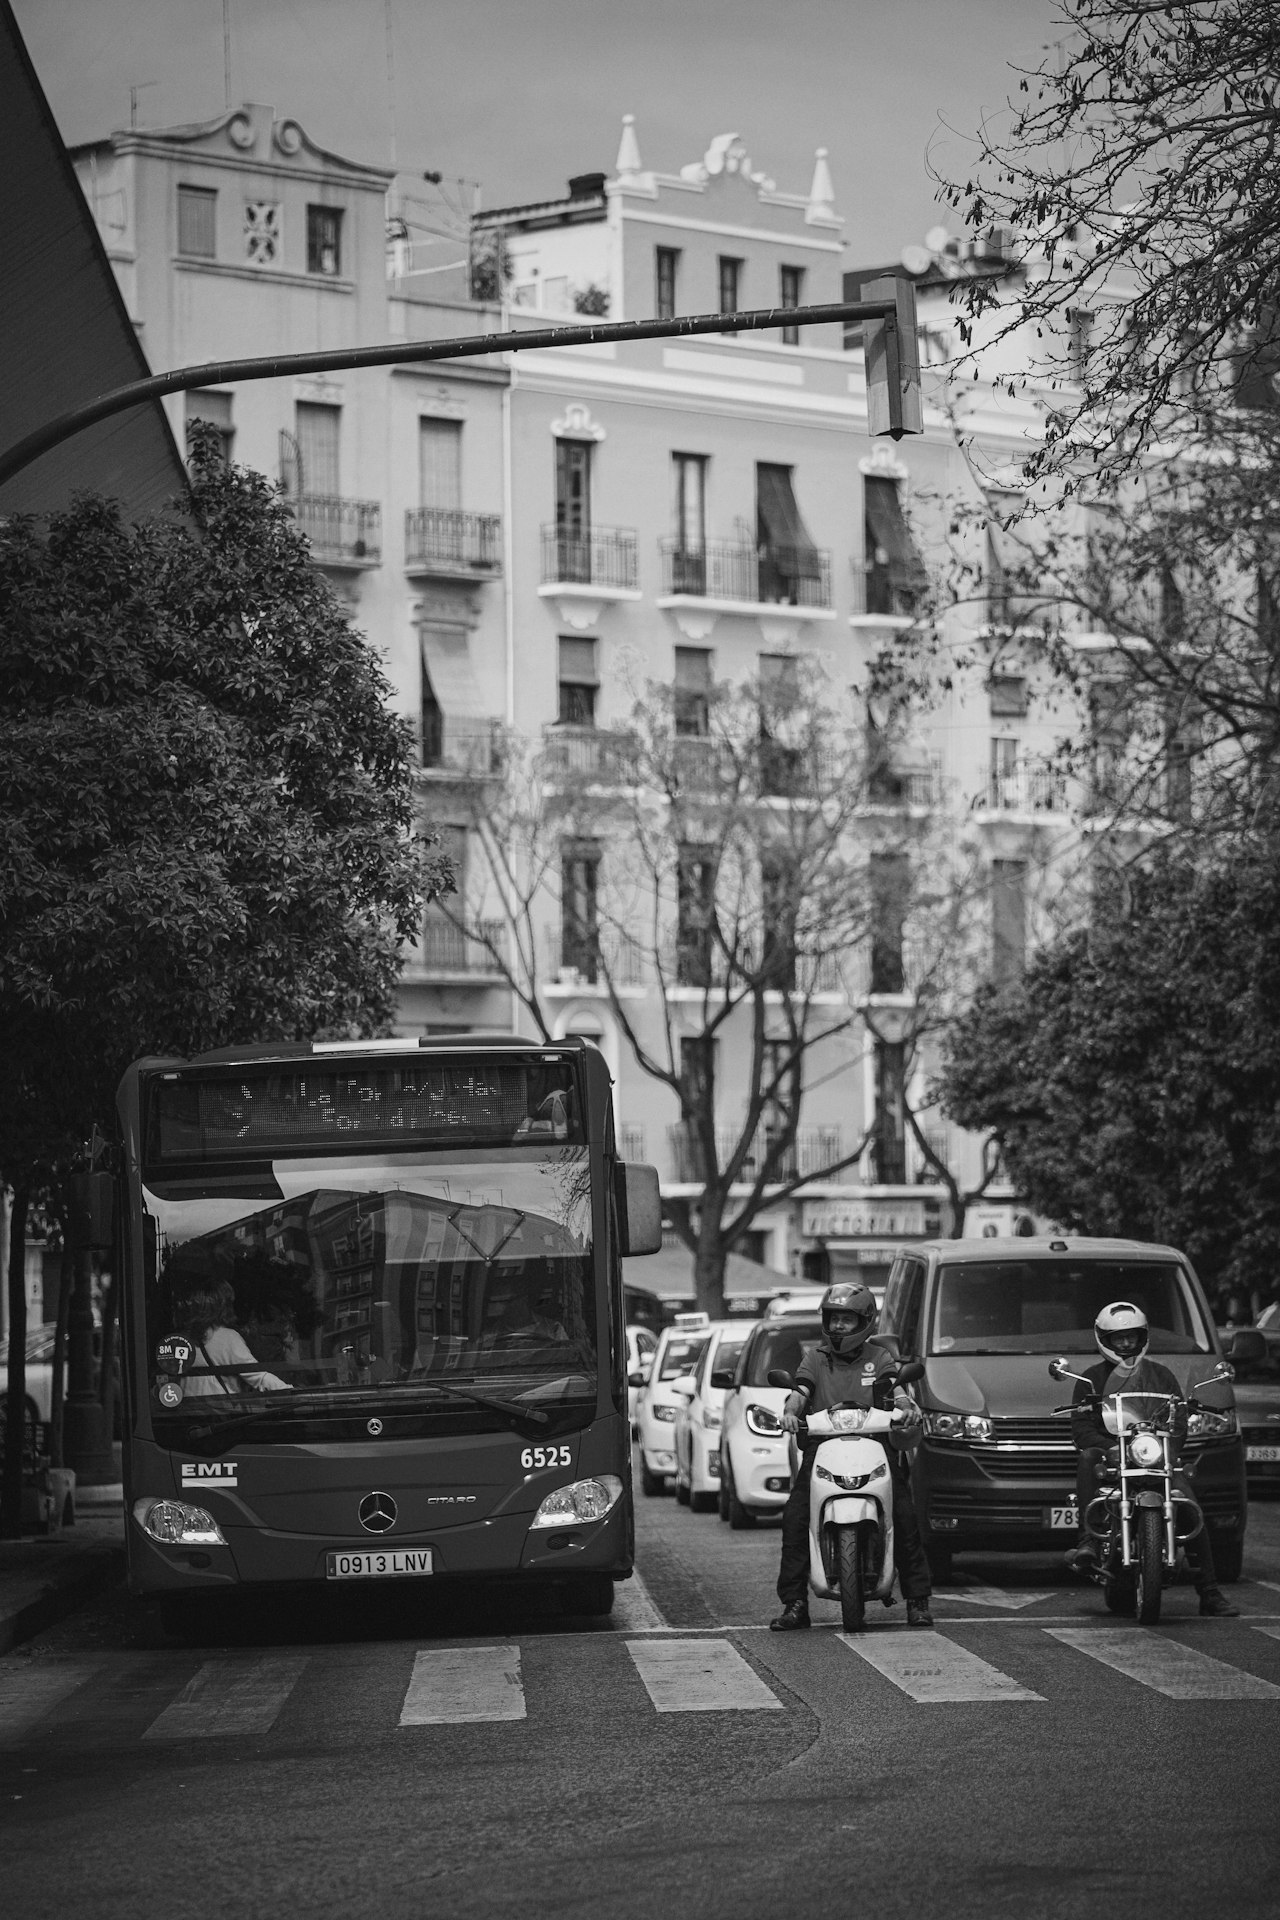 Valencia red bus driving down a street next to tall buildings